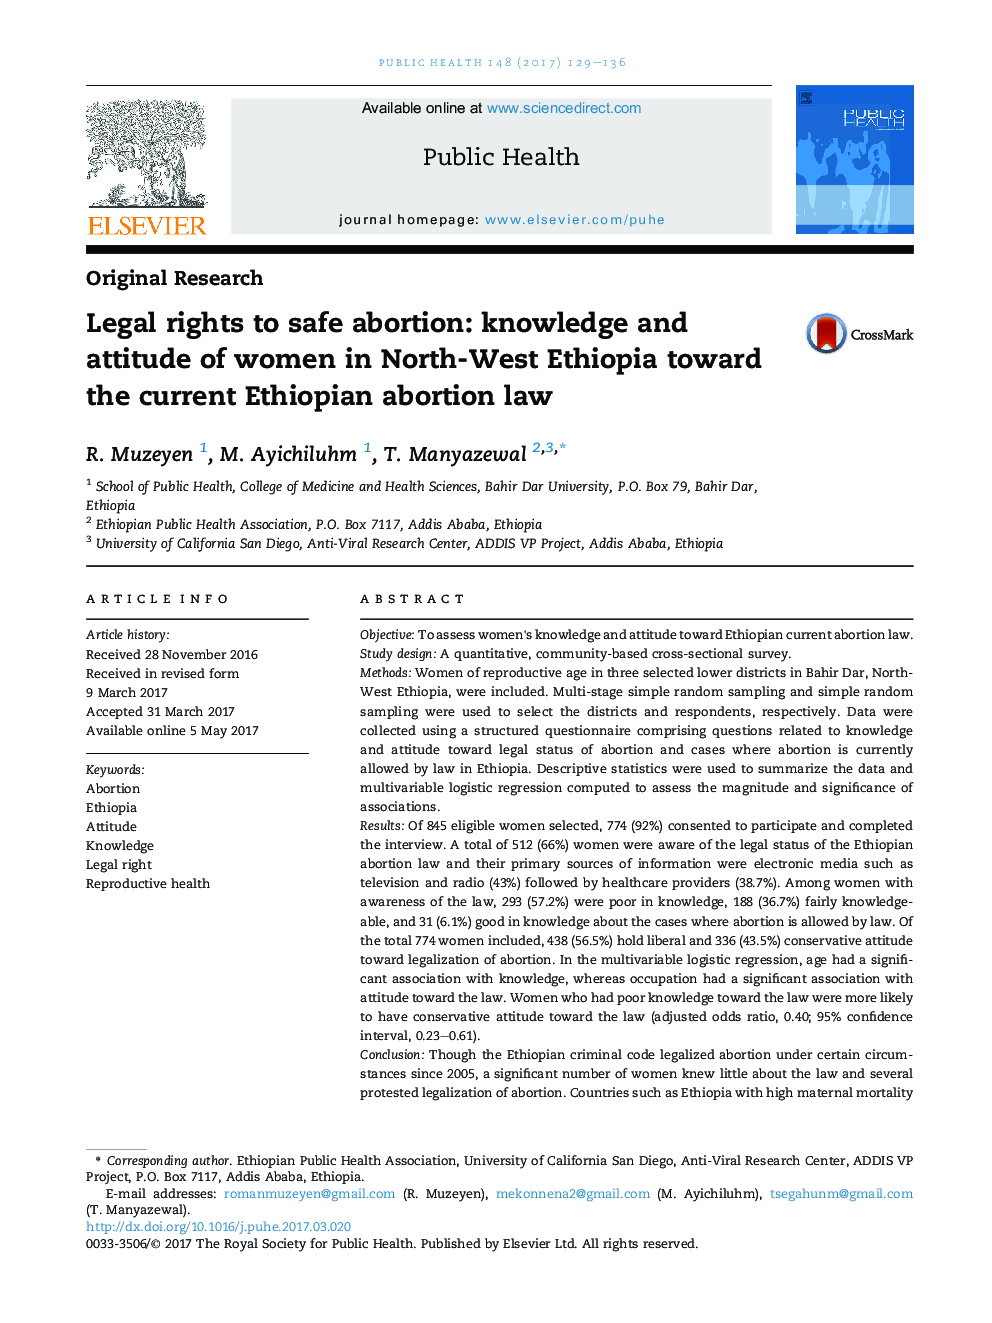 Legal rights to safe abortion: knowledge and attitude of women in North-West Ethiopia toward the current Ethiopian abortion law